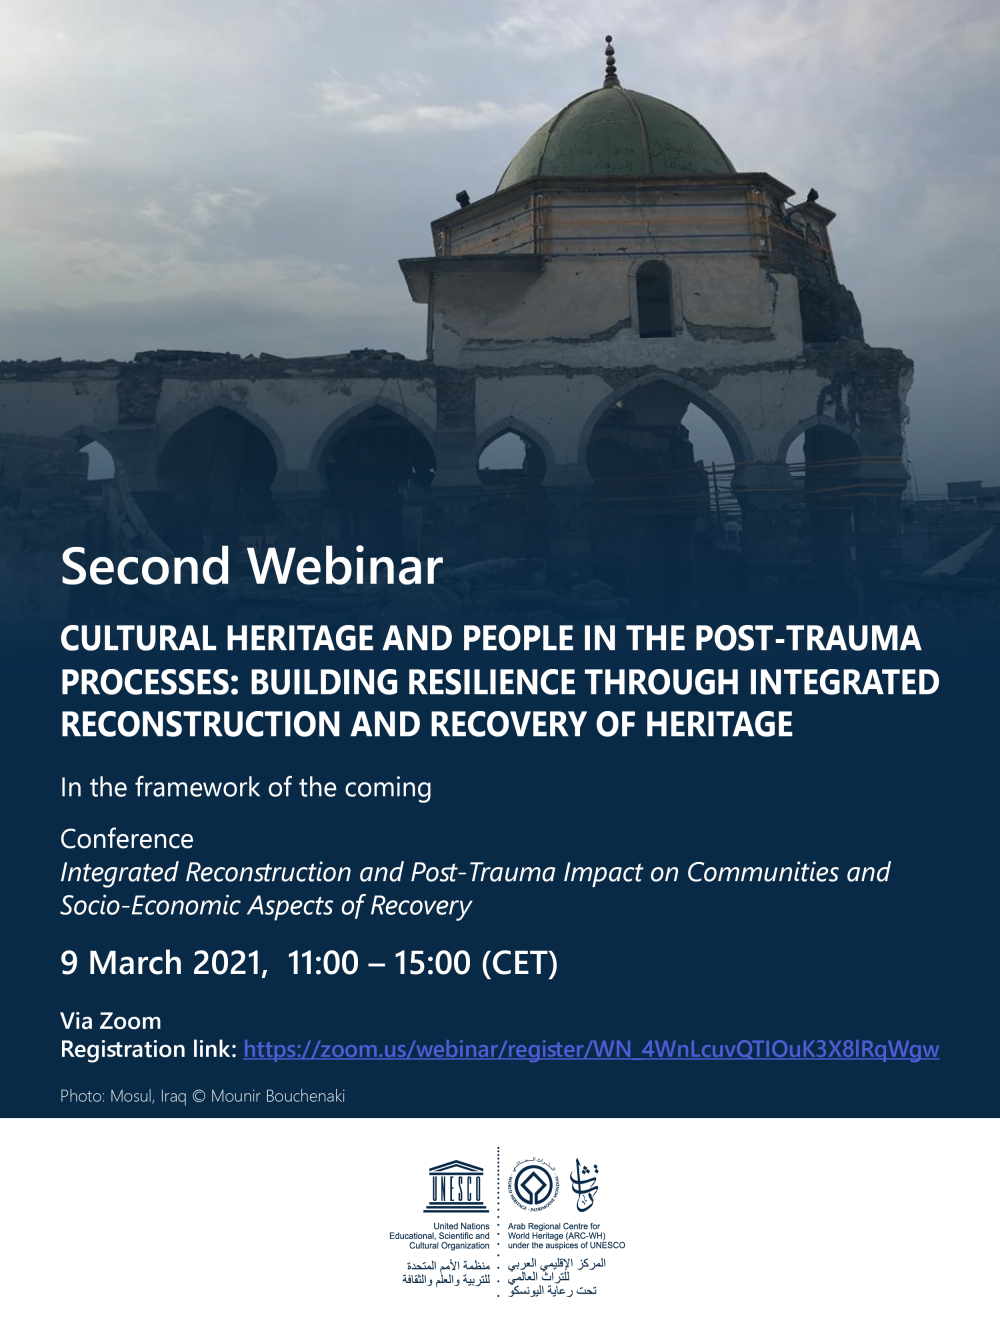 Webinar: Cultural Heritage and People in the Post-Trauma Process: Building Resilience through Integrated Reconstruction and Recovery of Heritage